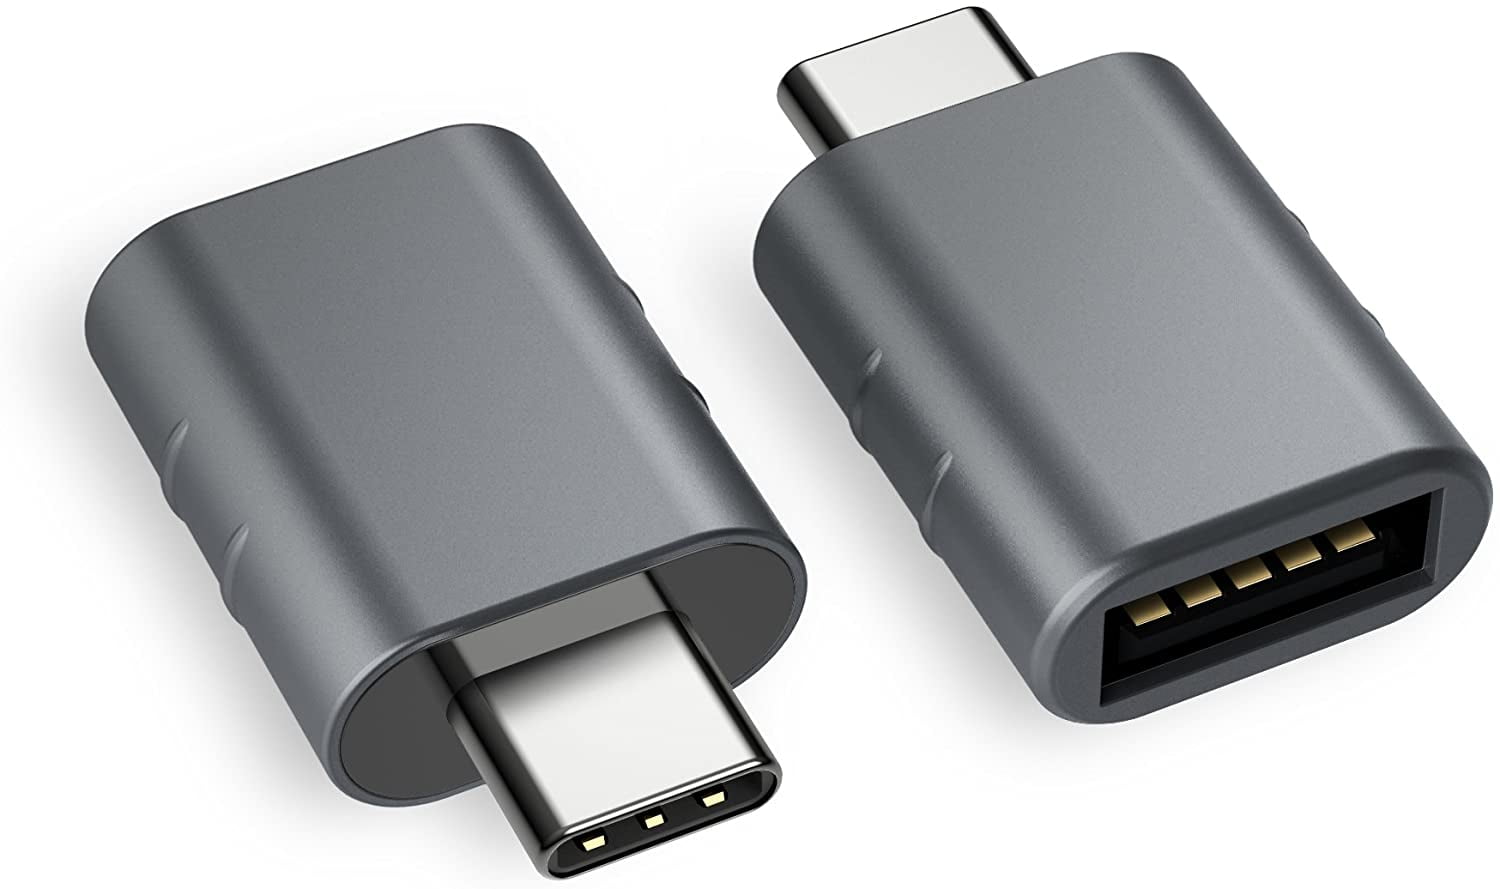 plus Annoteren Heerlijk Usb C Adapter To Usb 3.0 [2 Pieces] Otg Usb Type C Adapter, Thunderbolt 3  To Usb 3.1 / 3.0 / 2.0, Compatible With Huawei Mate 20, Samsung Galaxy,  Surface Go, Dell Xps Reusable - Walmart.com